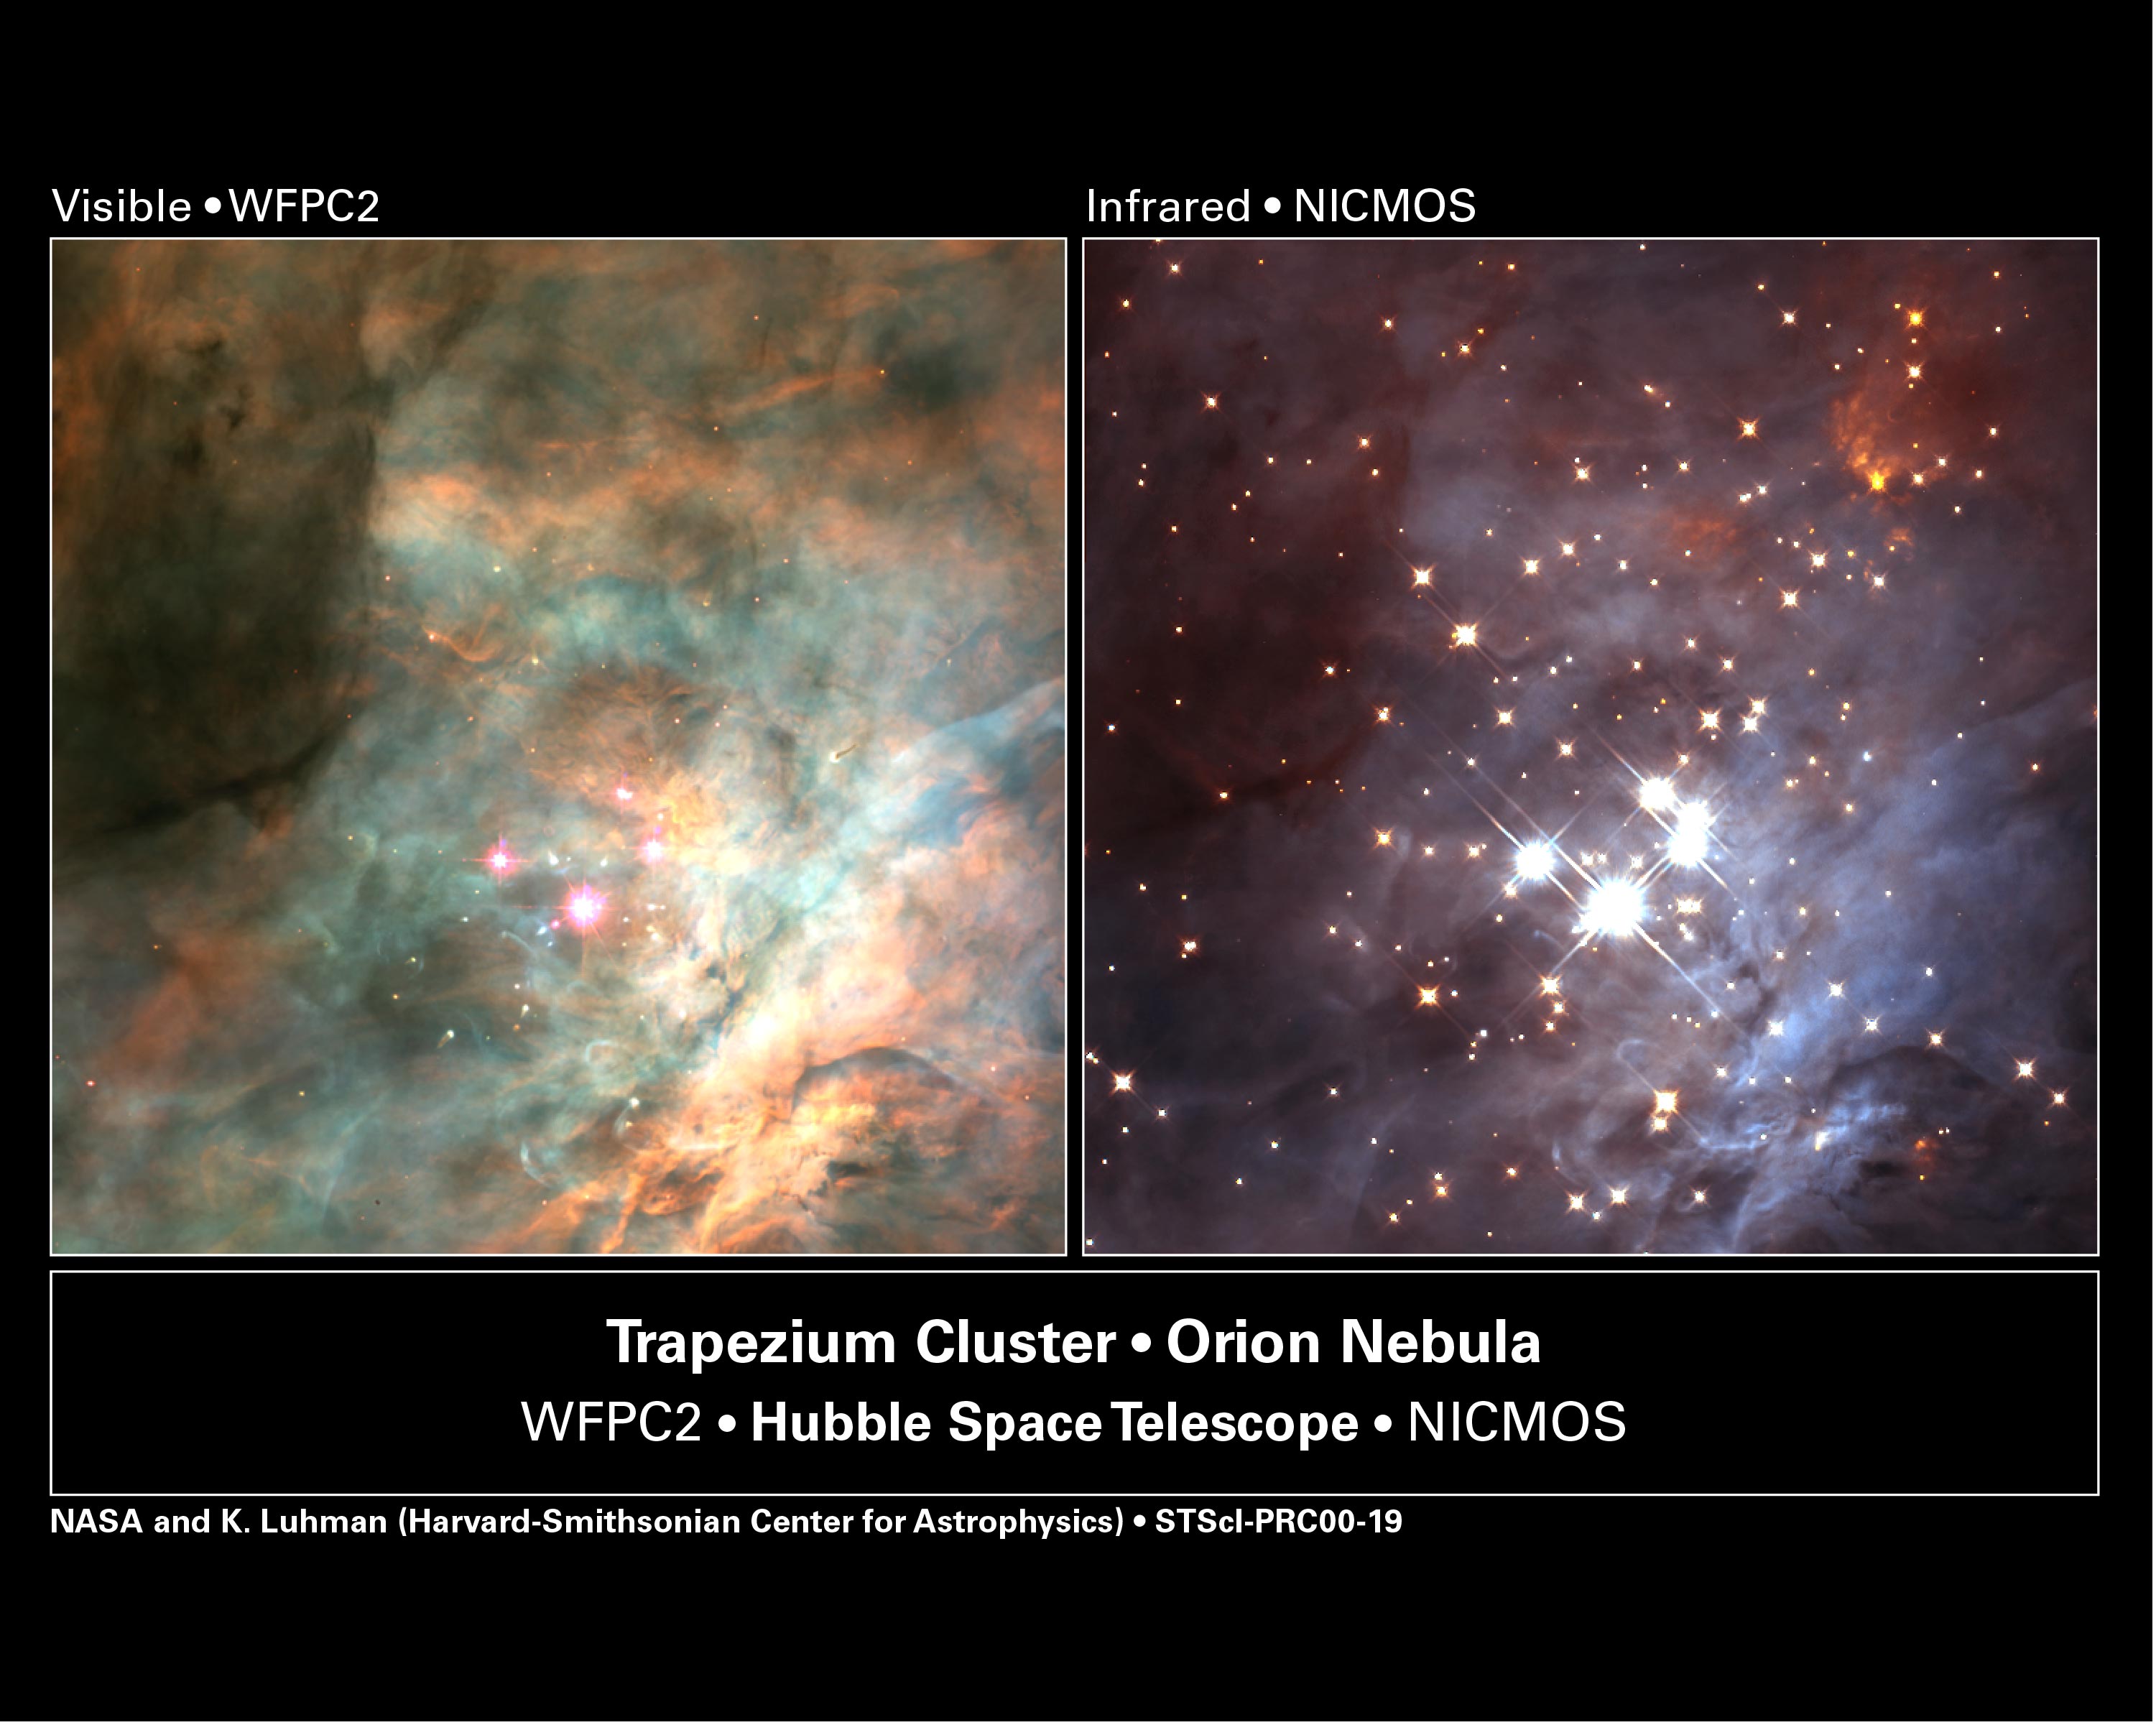 Two pre-main sequence stars, still embedded in their natal 